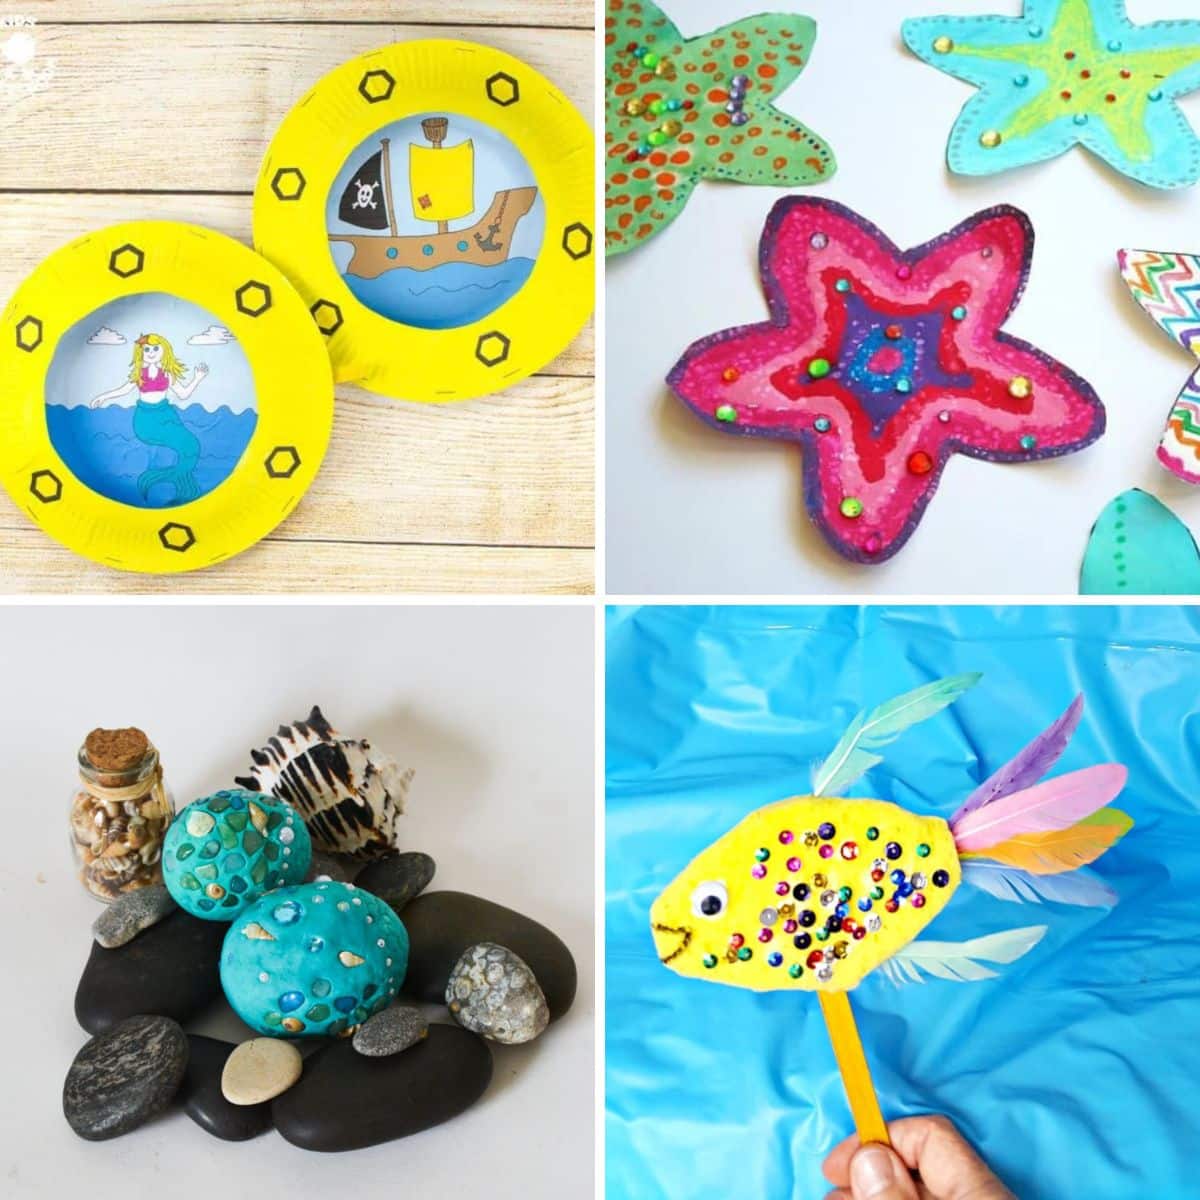 4 images of amazing summer crafts for kids.